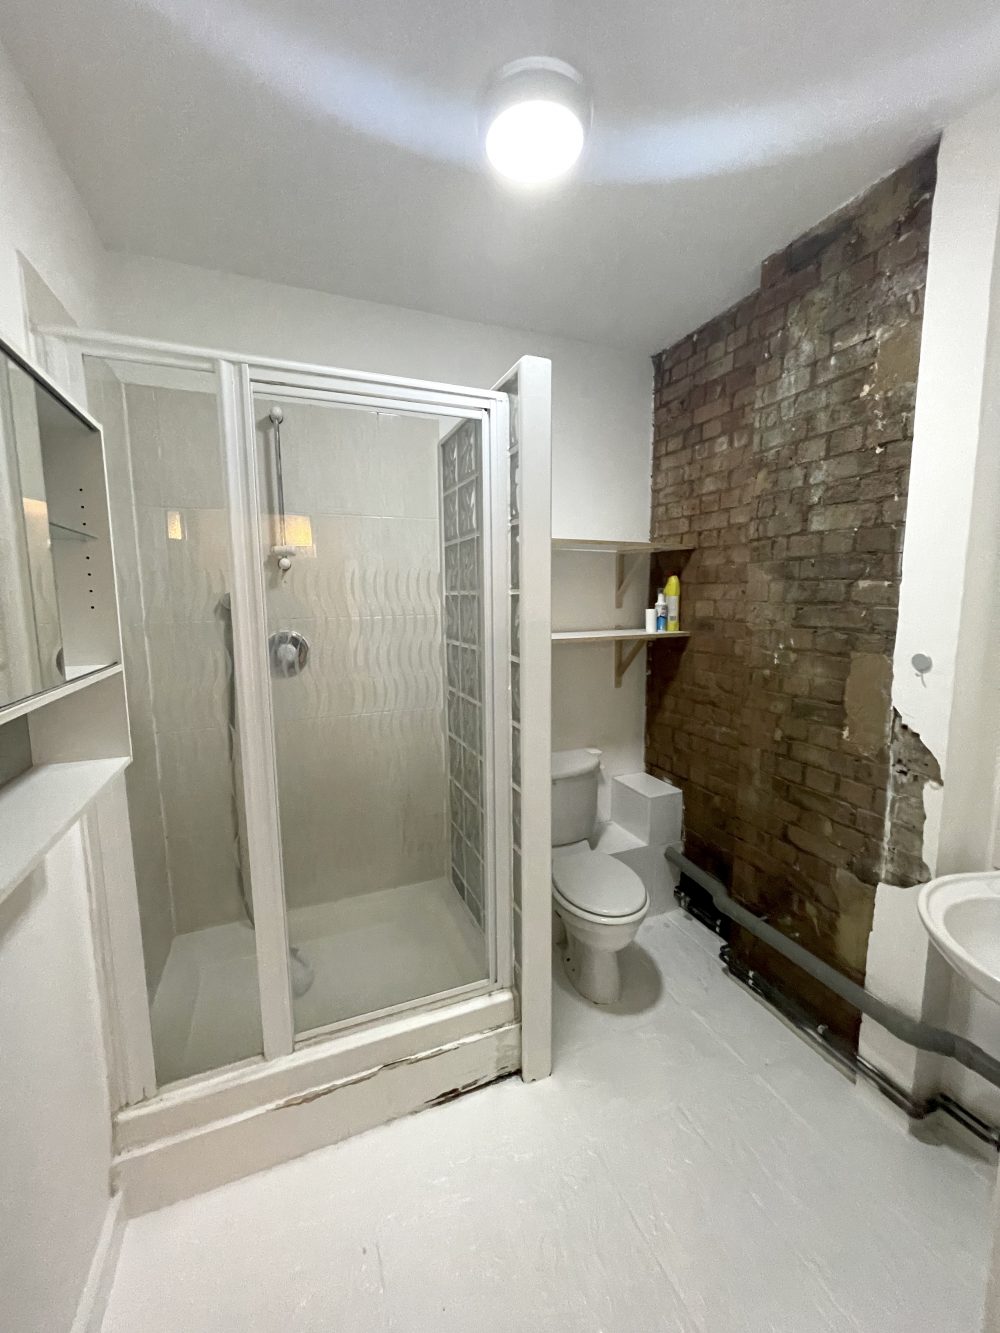 2 Bedroom Flat Available to rent in E9 London Fields Enterprise House Pic31